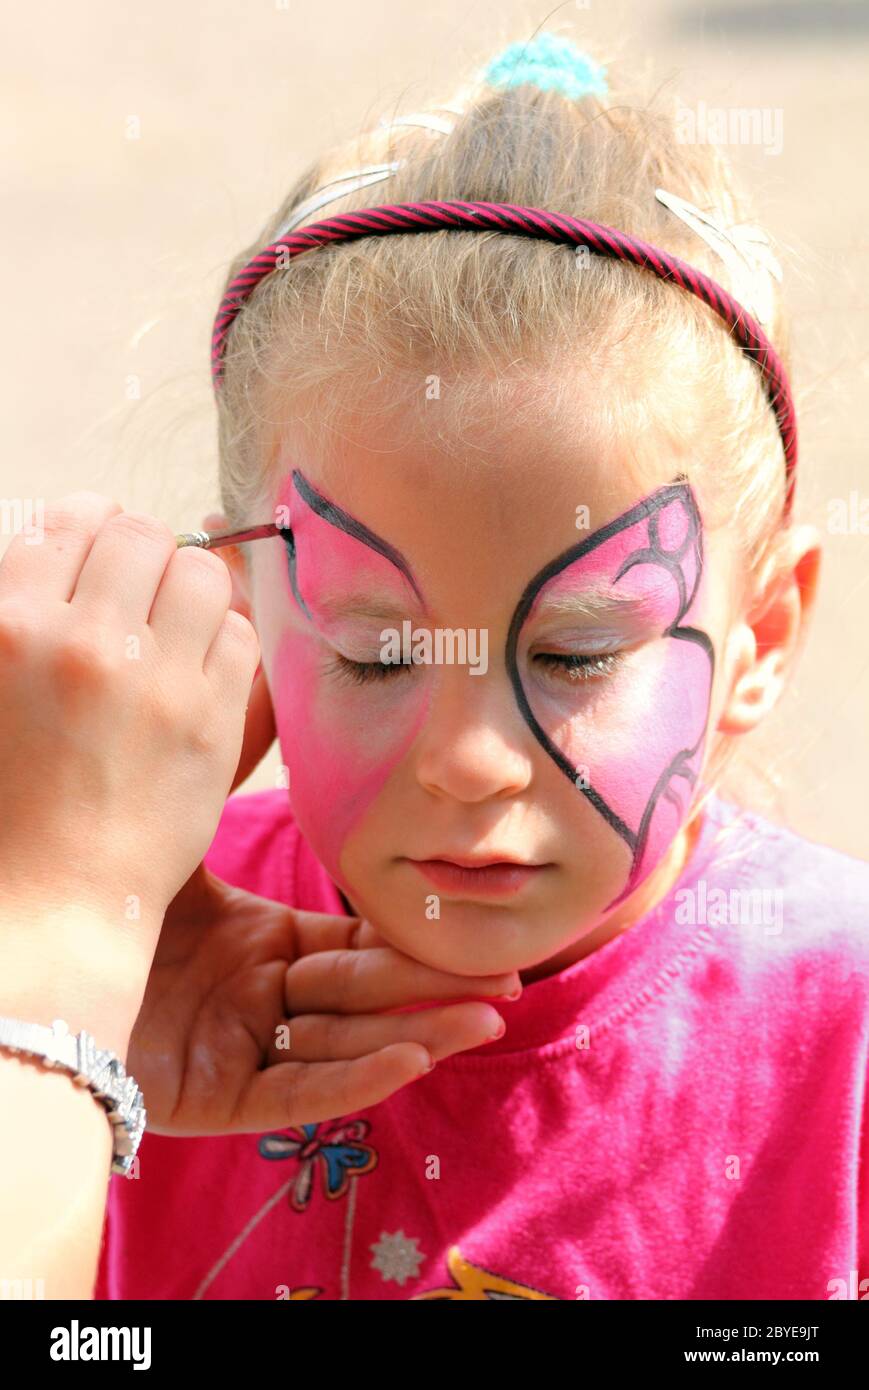 Child Carnival Costume Scary Face Painting Stock Photo 1526647835